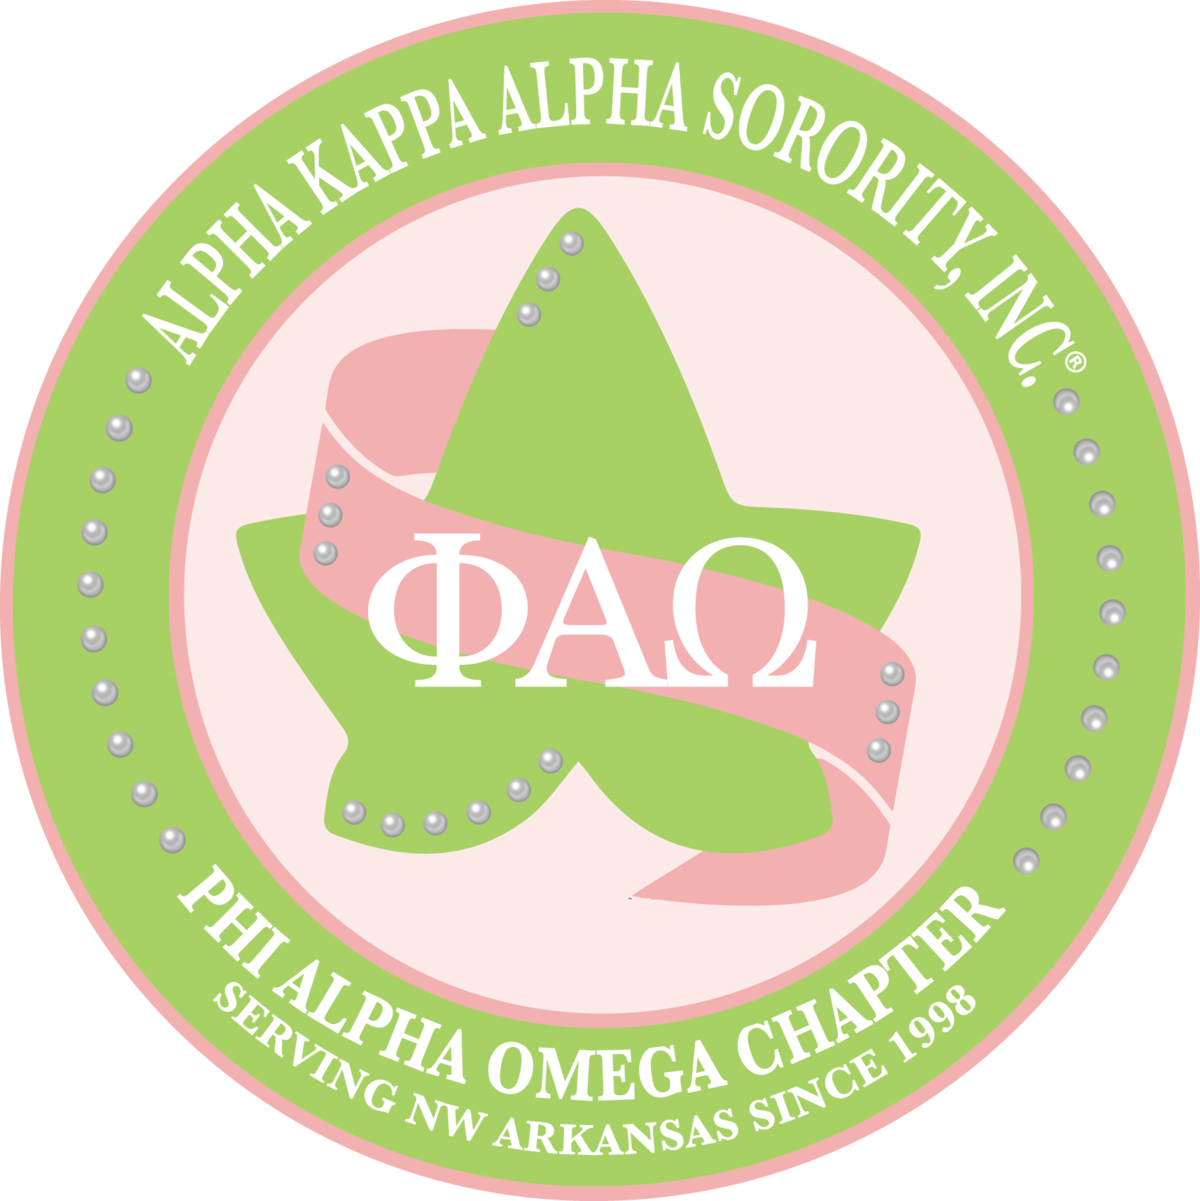 Meet the PAO Chapter